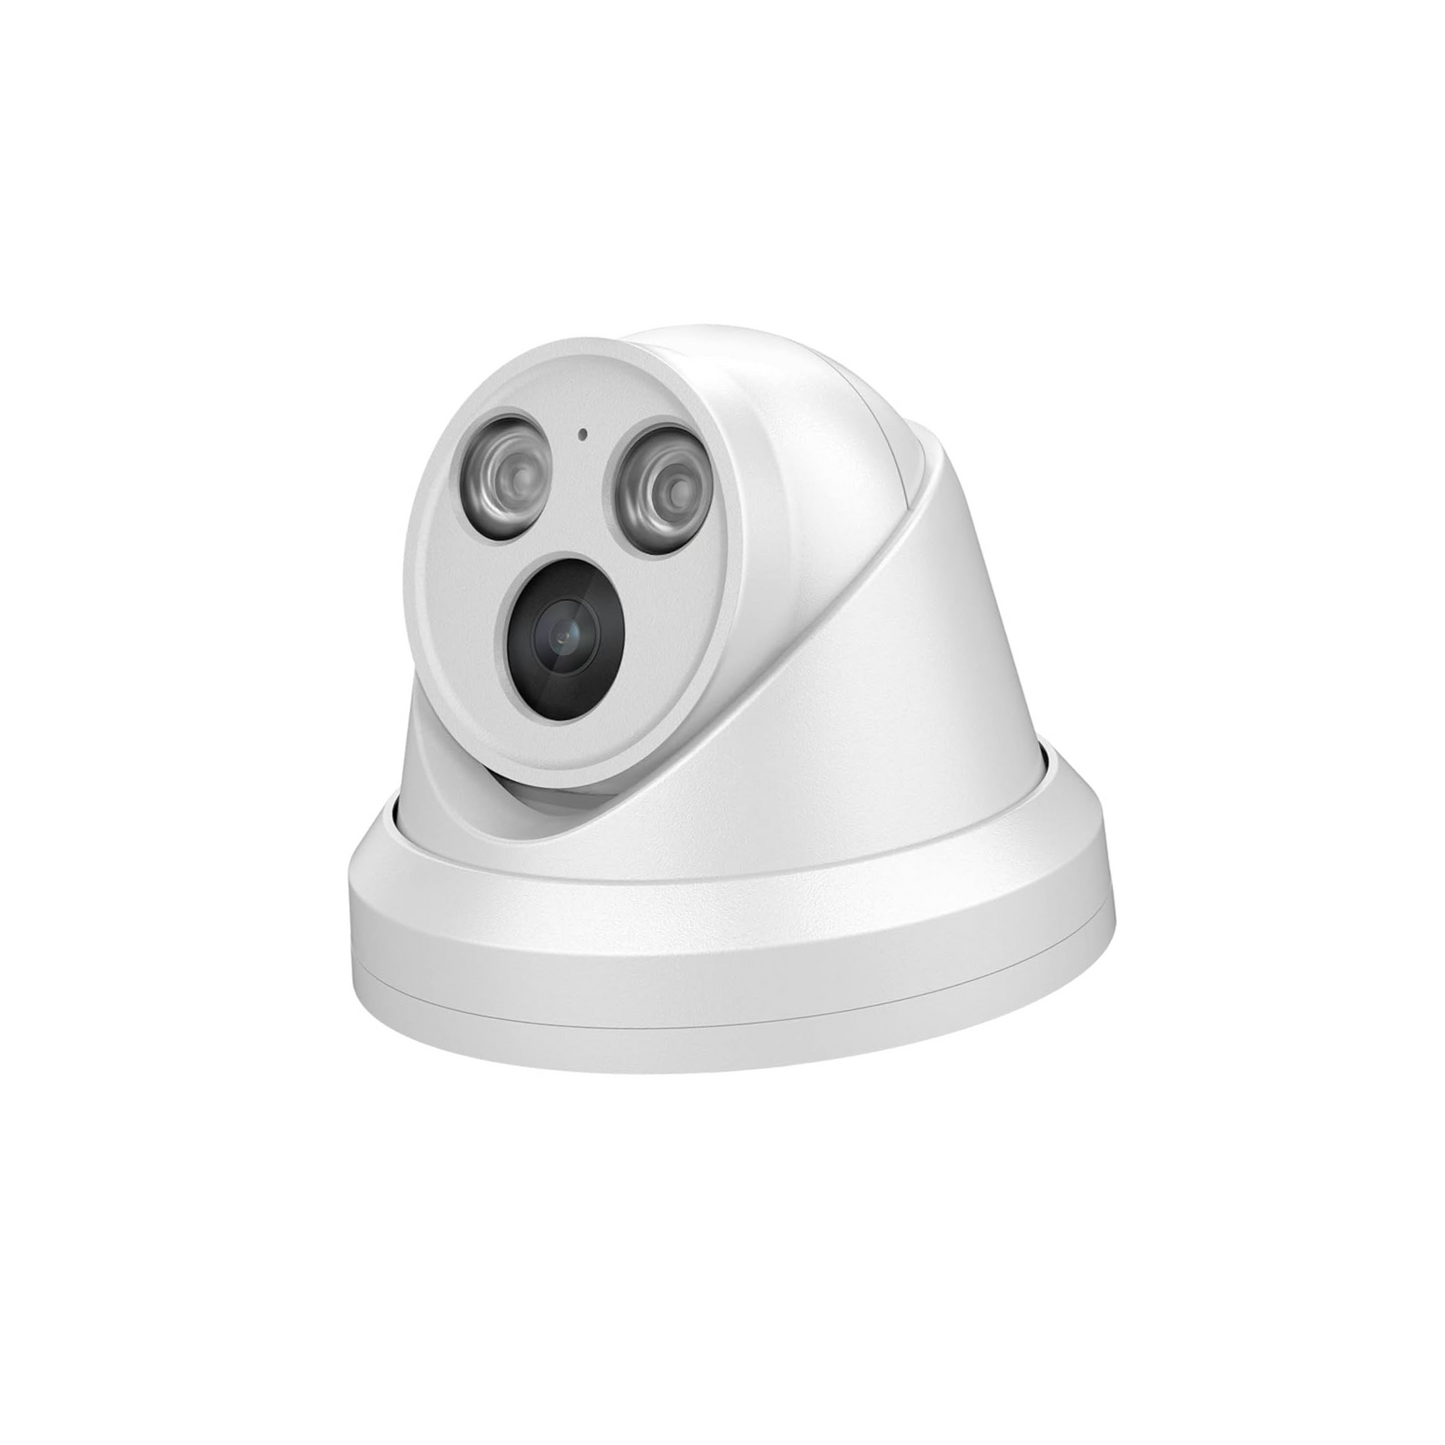 Turret Security Camera - Monthly Subscription - 3 Year Tab